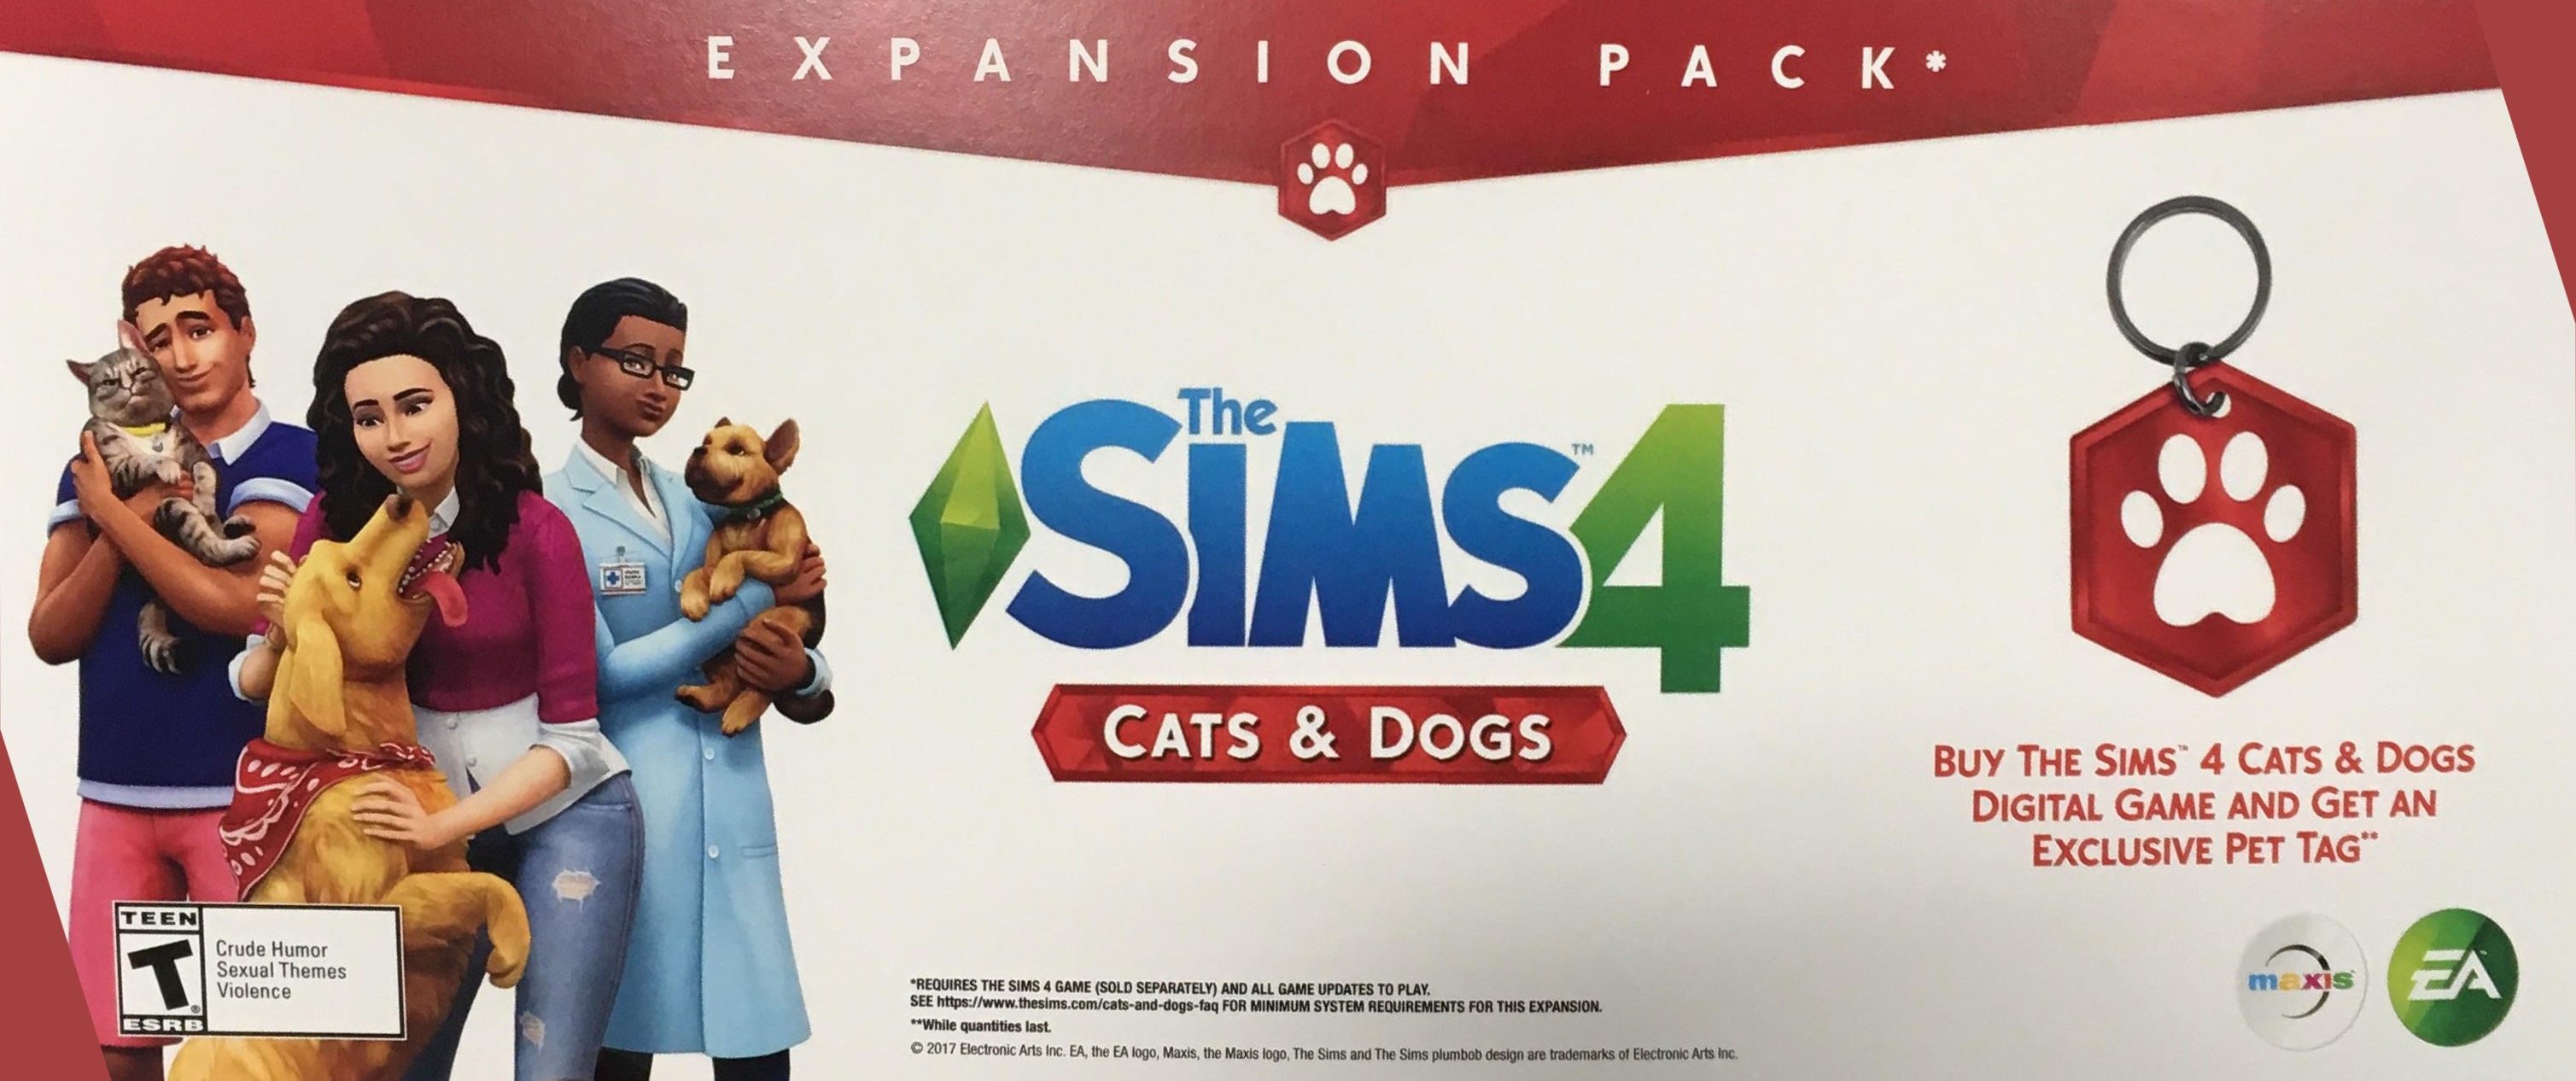 sims 4 expansion packs free codes